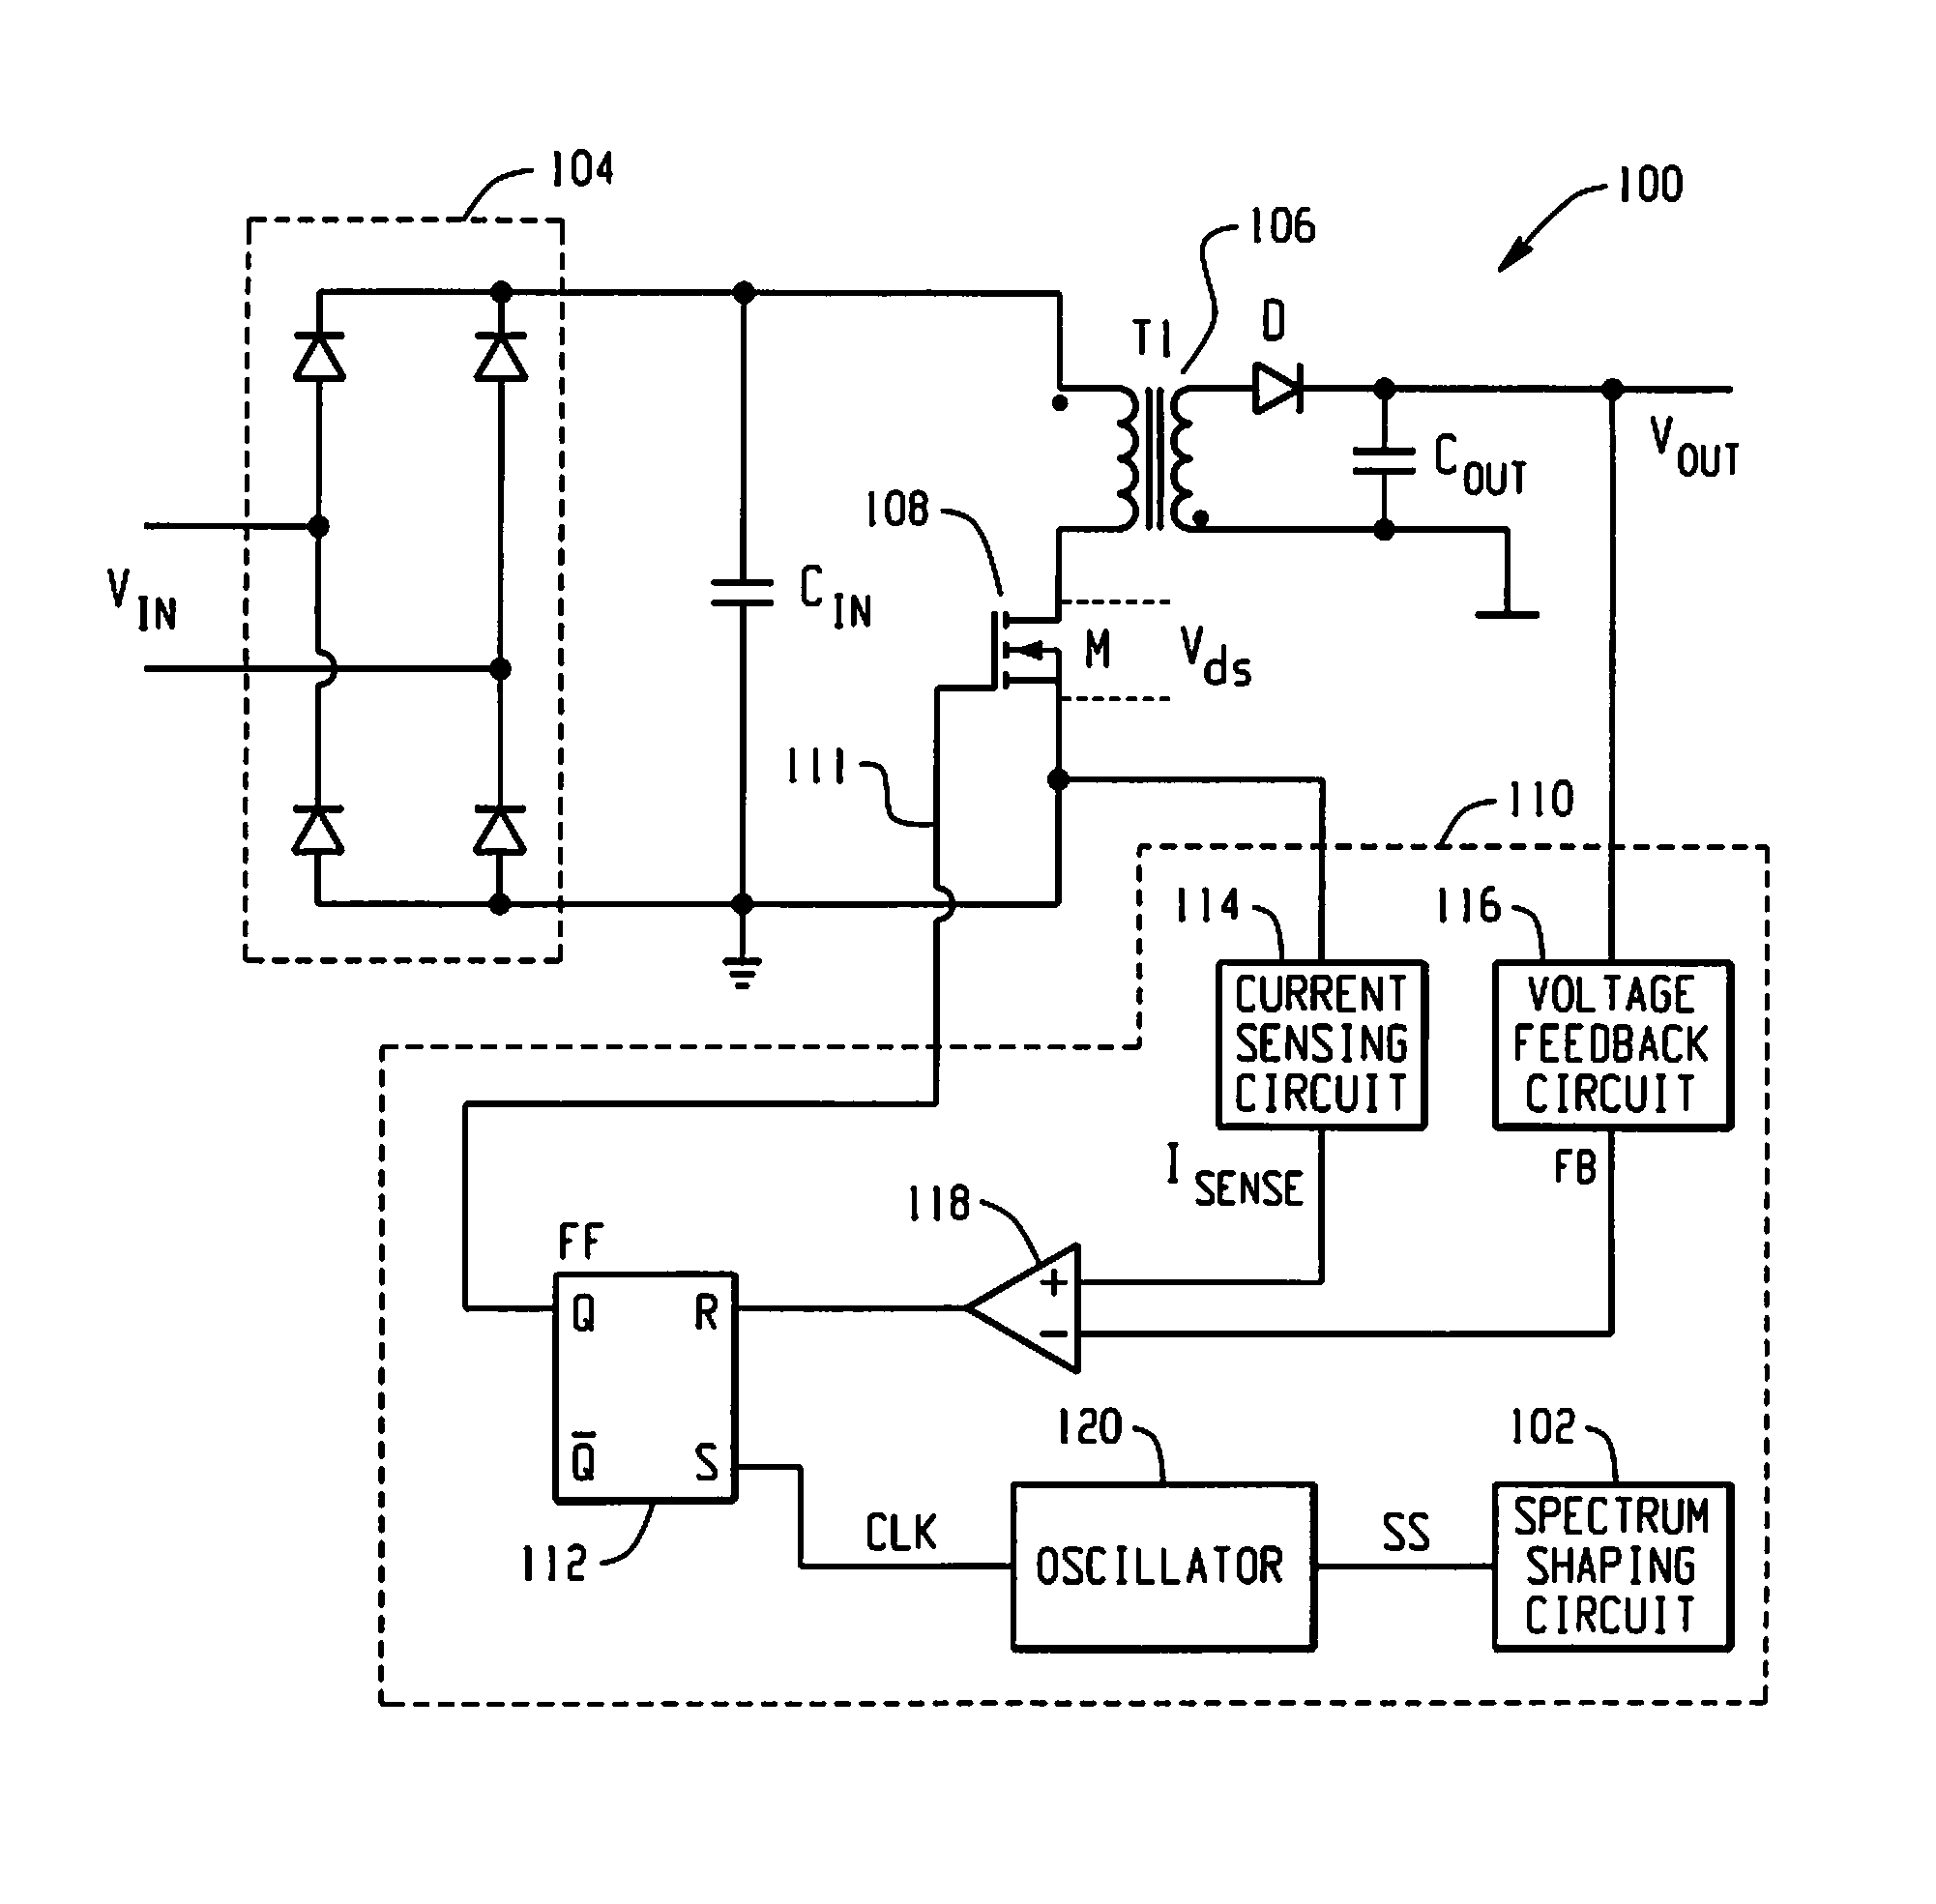 Switching mode power supply with a spectrum shaping circuit